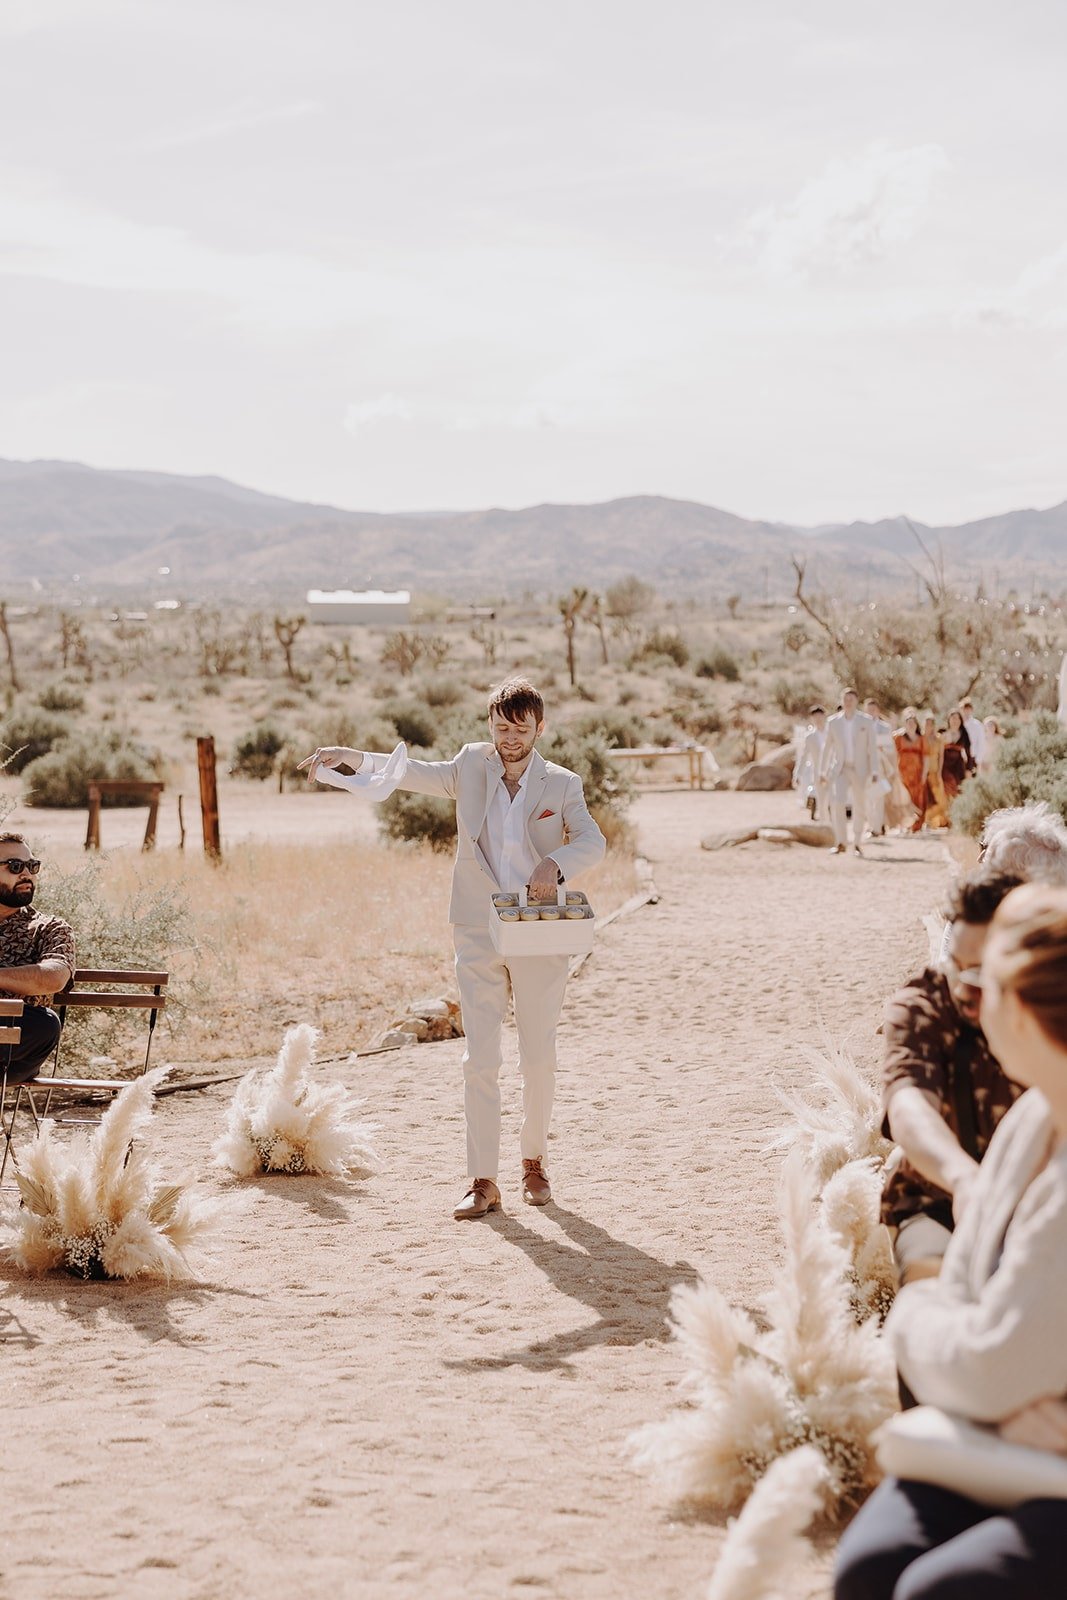 Groomsman passes out cans of beer at outdoor wedding ceremony at The Ruin Venue in Joshua Tree